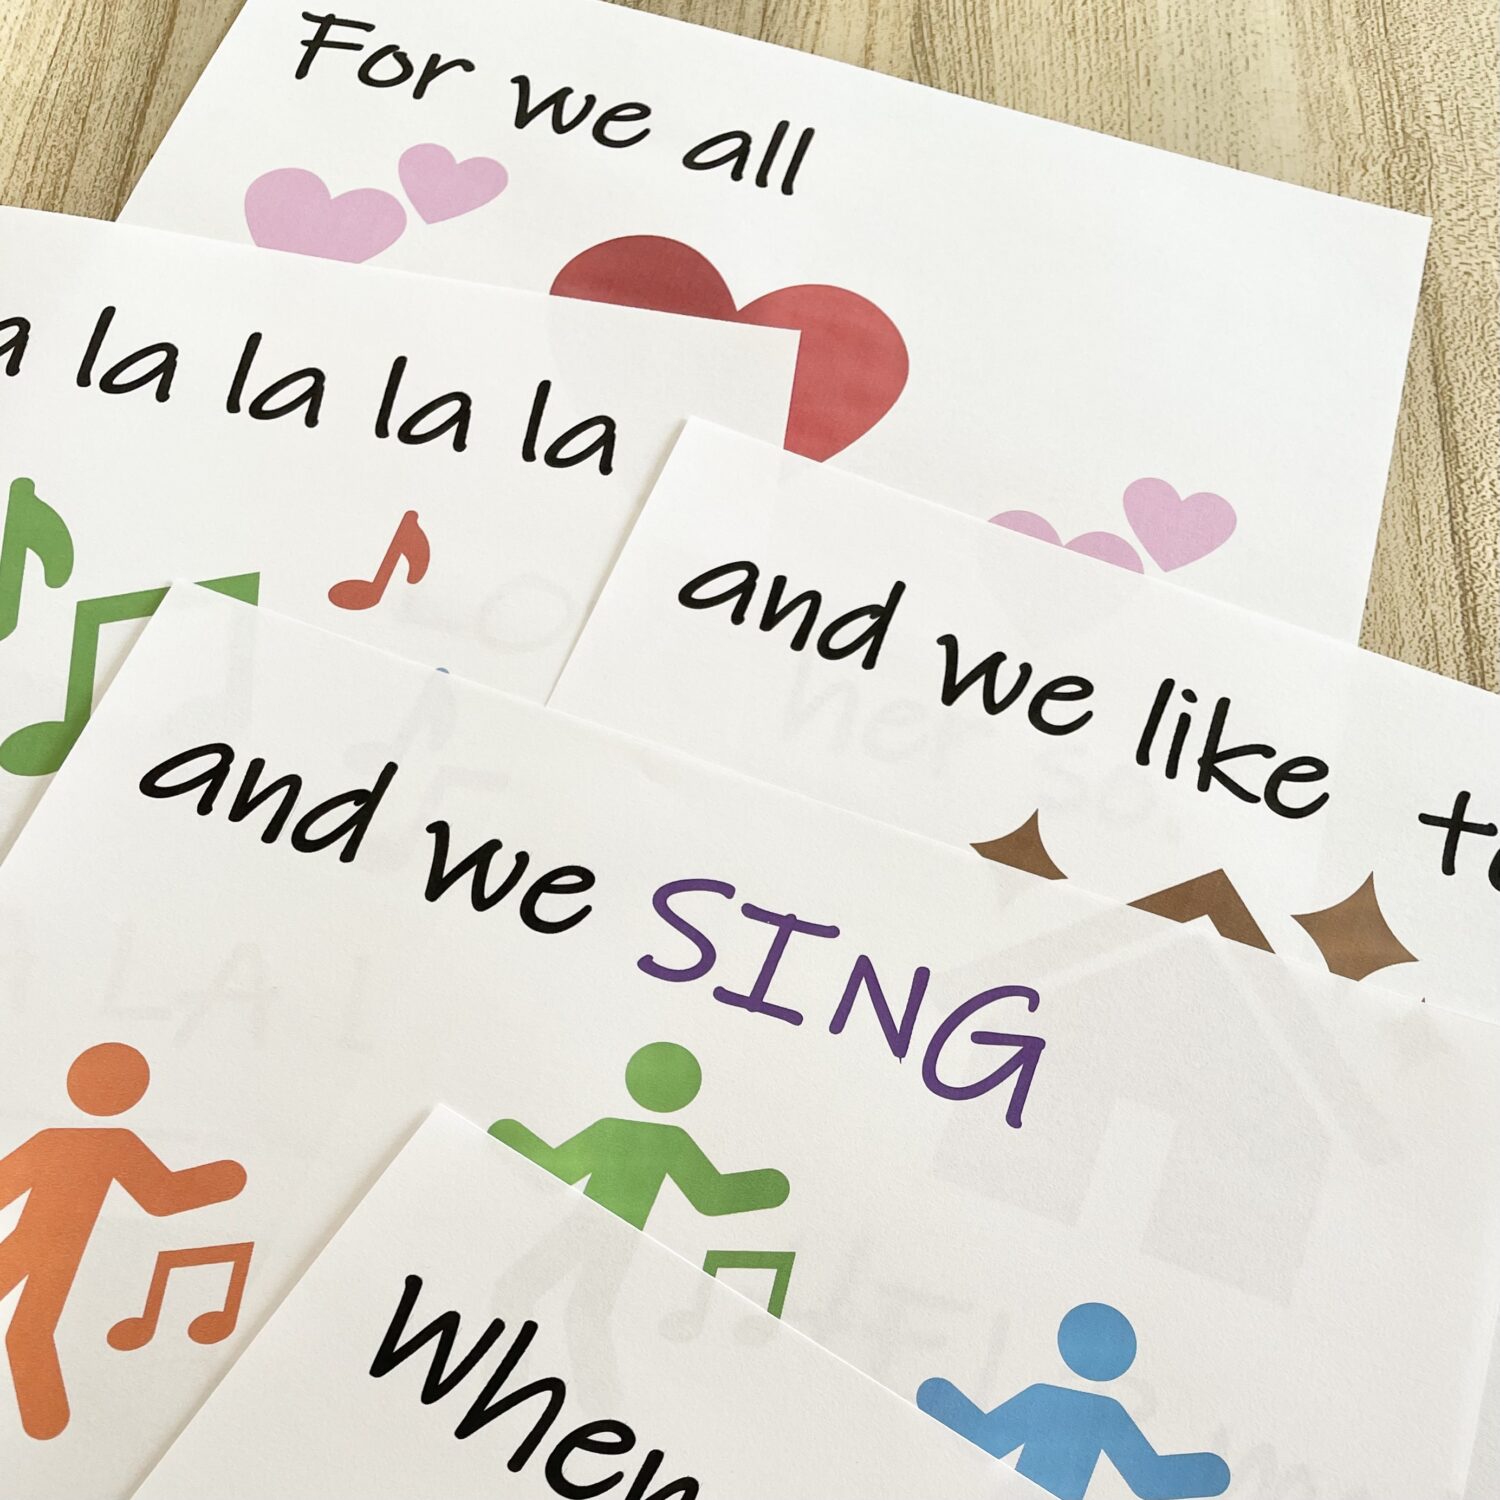 When We're Helping Dropped Pictures - Rearrange the pictures into the correct order in this fun singing time idea with printable song helps for LDS Primary Music Leaders.